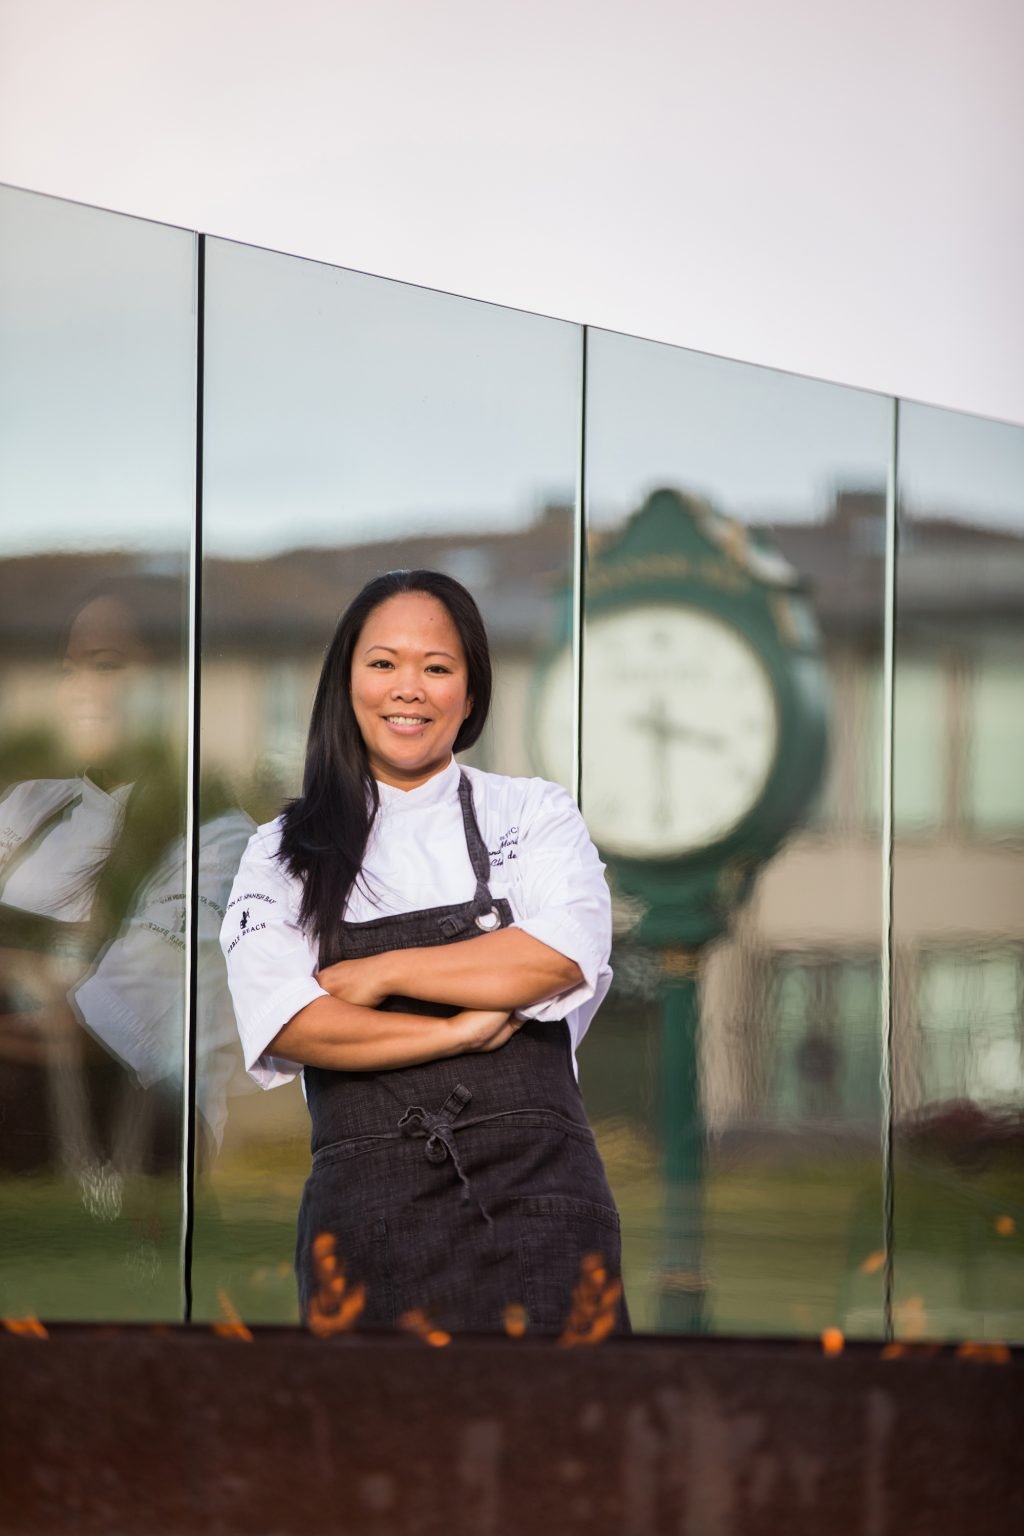 Chef Anna Marie Bayonito poses on the patio of STICKS restaurant at The Inn at Spanish Bay.